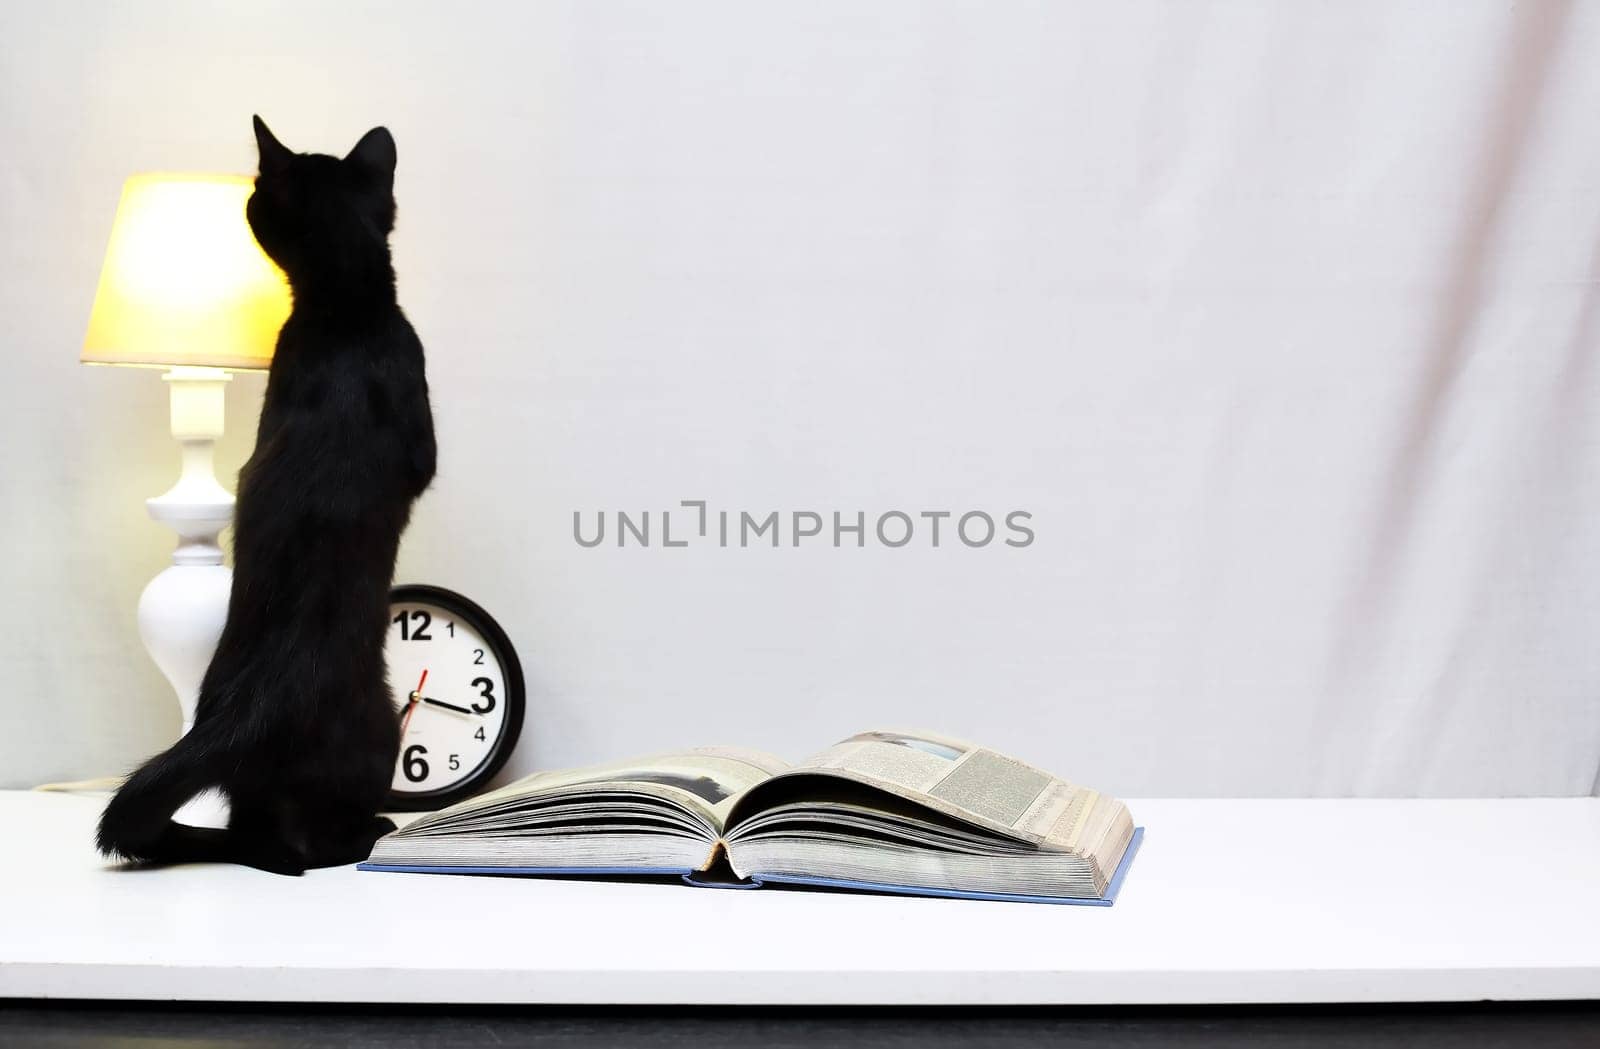 A small black kitten near table lamp, clock and open book